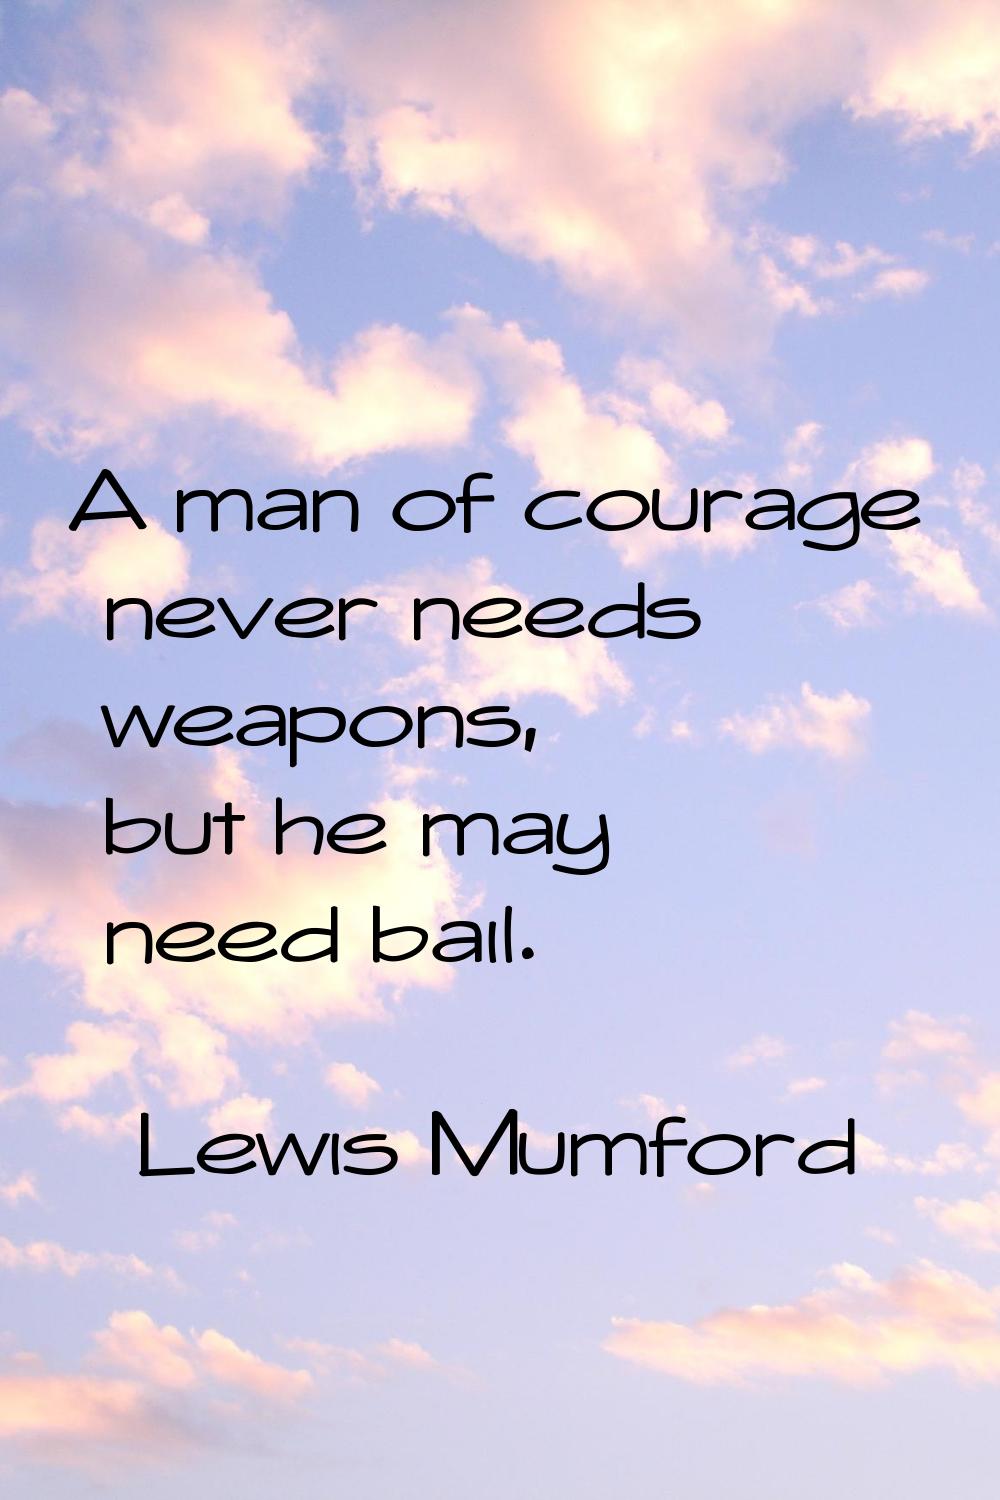 A man of courage never needs weapons, but he may need bail.